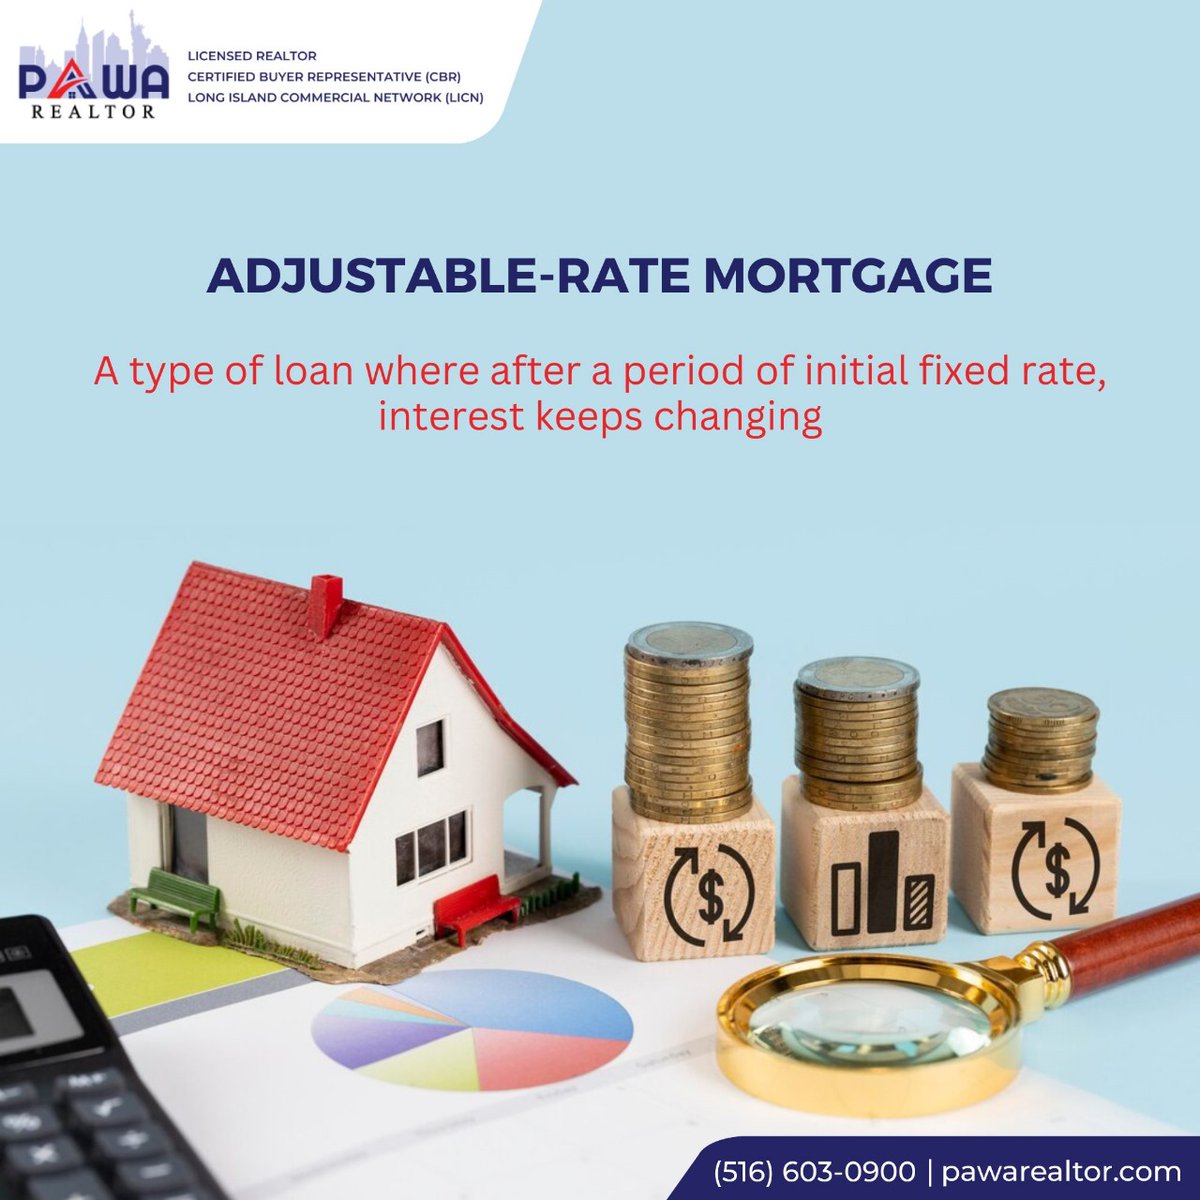 Adjustable-Rate Mortgage

According to the #market, your interest rate may increase or decrease. #Follow #PawaRealtor to know more.

#luxuryrealestate #SuffolkLuxuryHomes #suffolkrealestate #BuySellList #propertyforsale #cottage #cottagegarden #countrycottage #houseandgarden